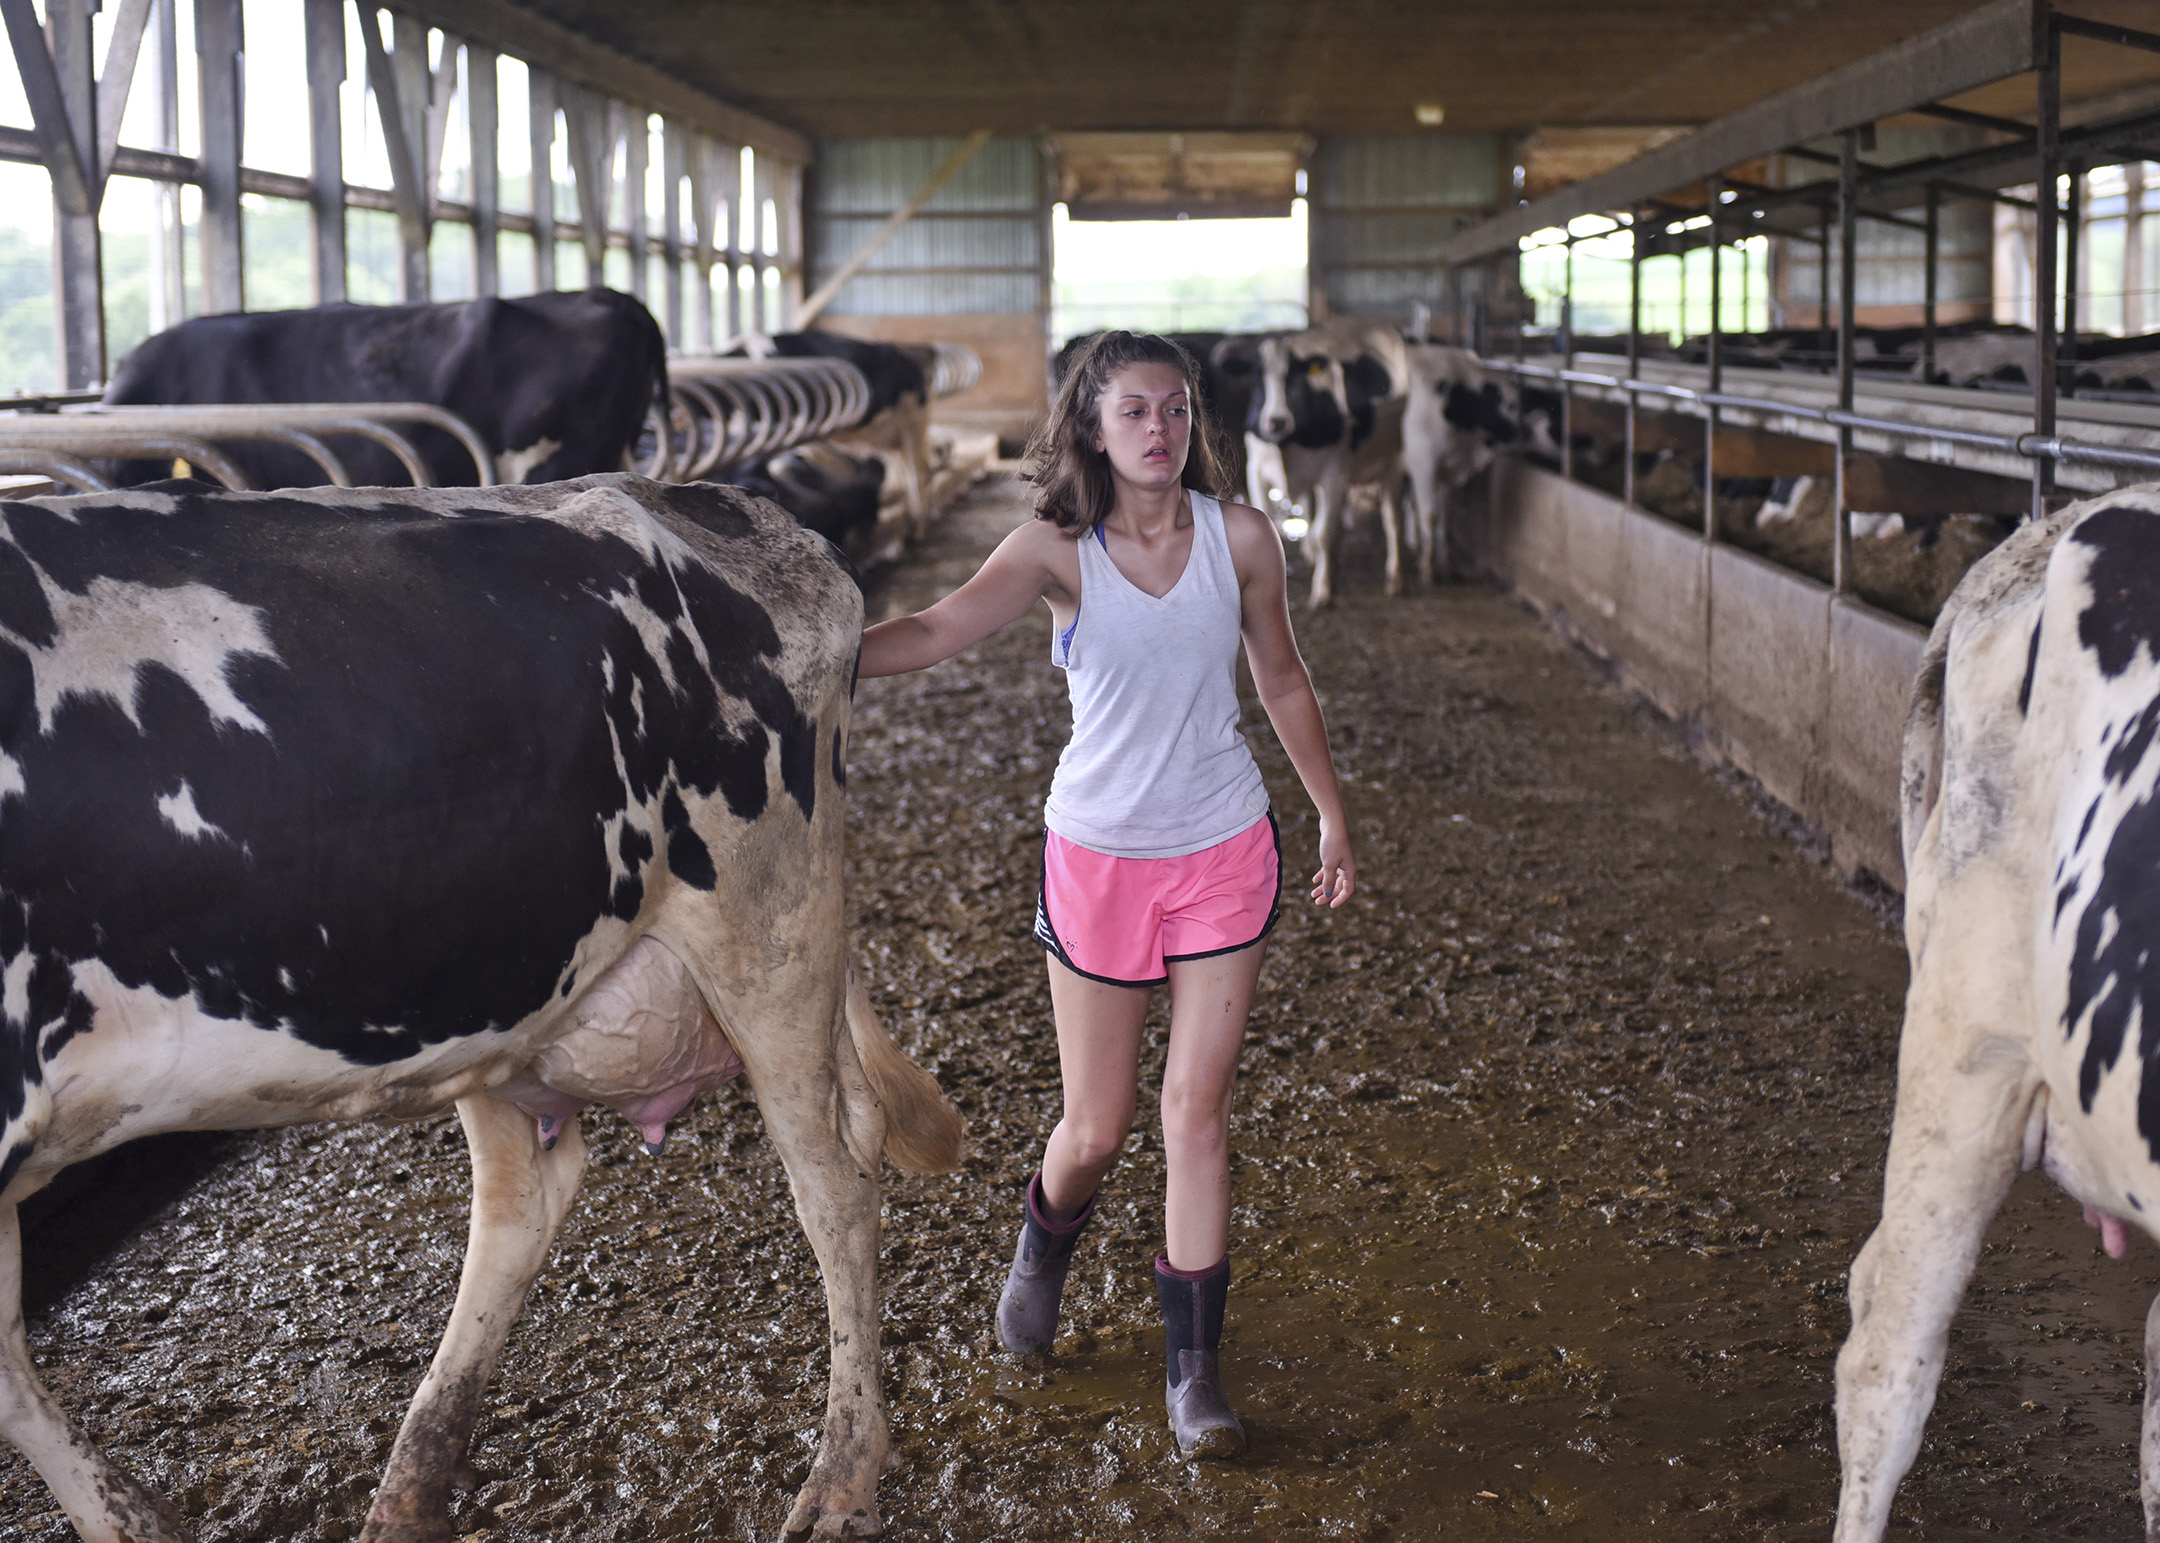  Morgan Krick finishes counting the dairy cows at the Krick Family Farm in Hamburg. Morgan is currently in her second year studying agricultural business at the University of Delaware. 